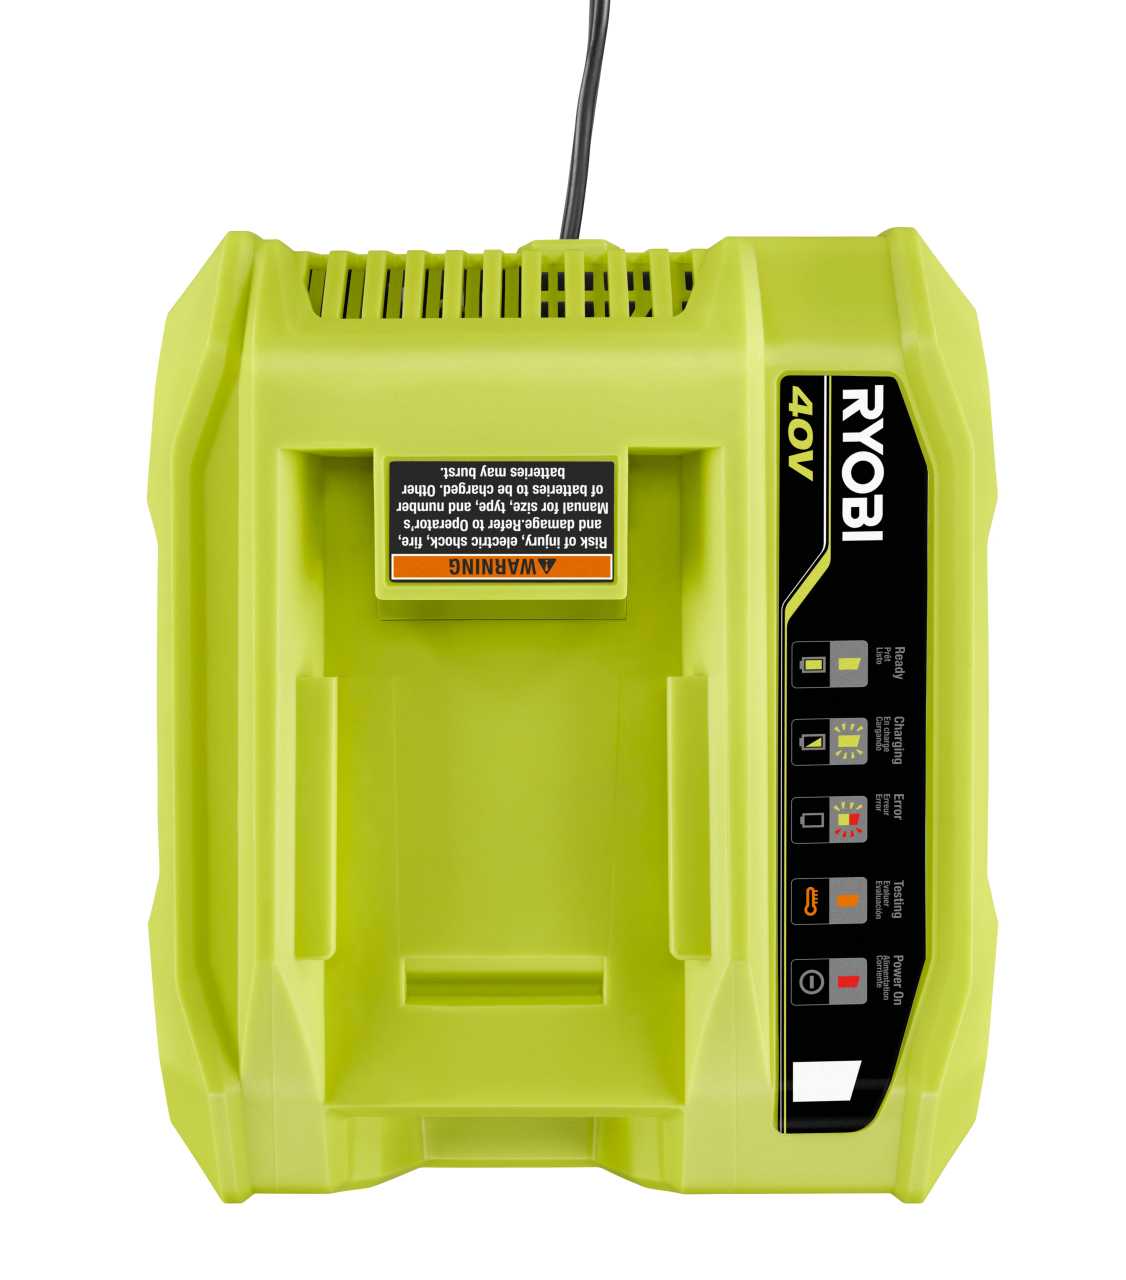 Product Features Image for 40V LITHIUM-ION 6.0AH HIGH CAPACITY BATTERY AND RAPID CHARGER KIT.